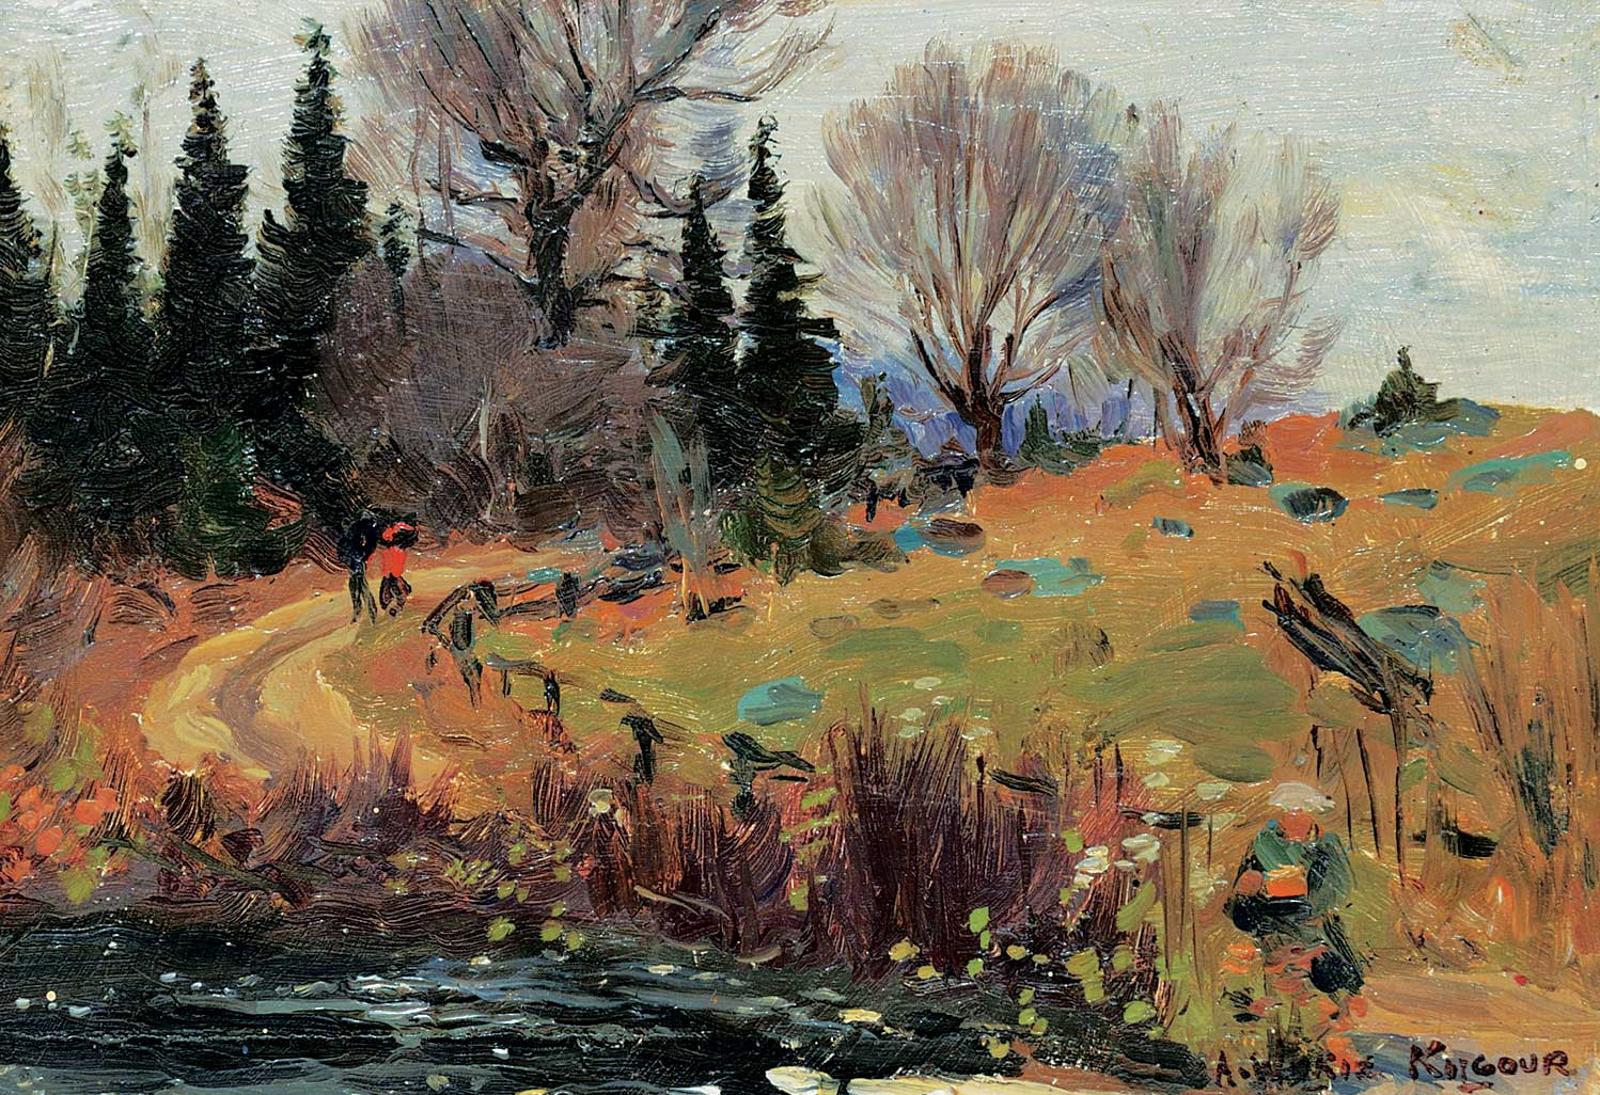 Andrew Wilkie Kilgour (1860-1930) - Untitled - Figures by a Trout Stream